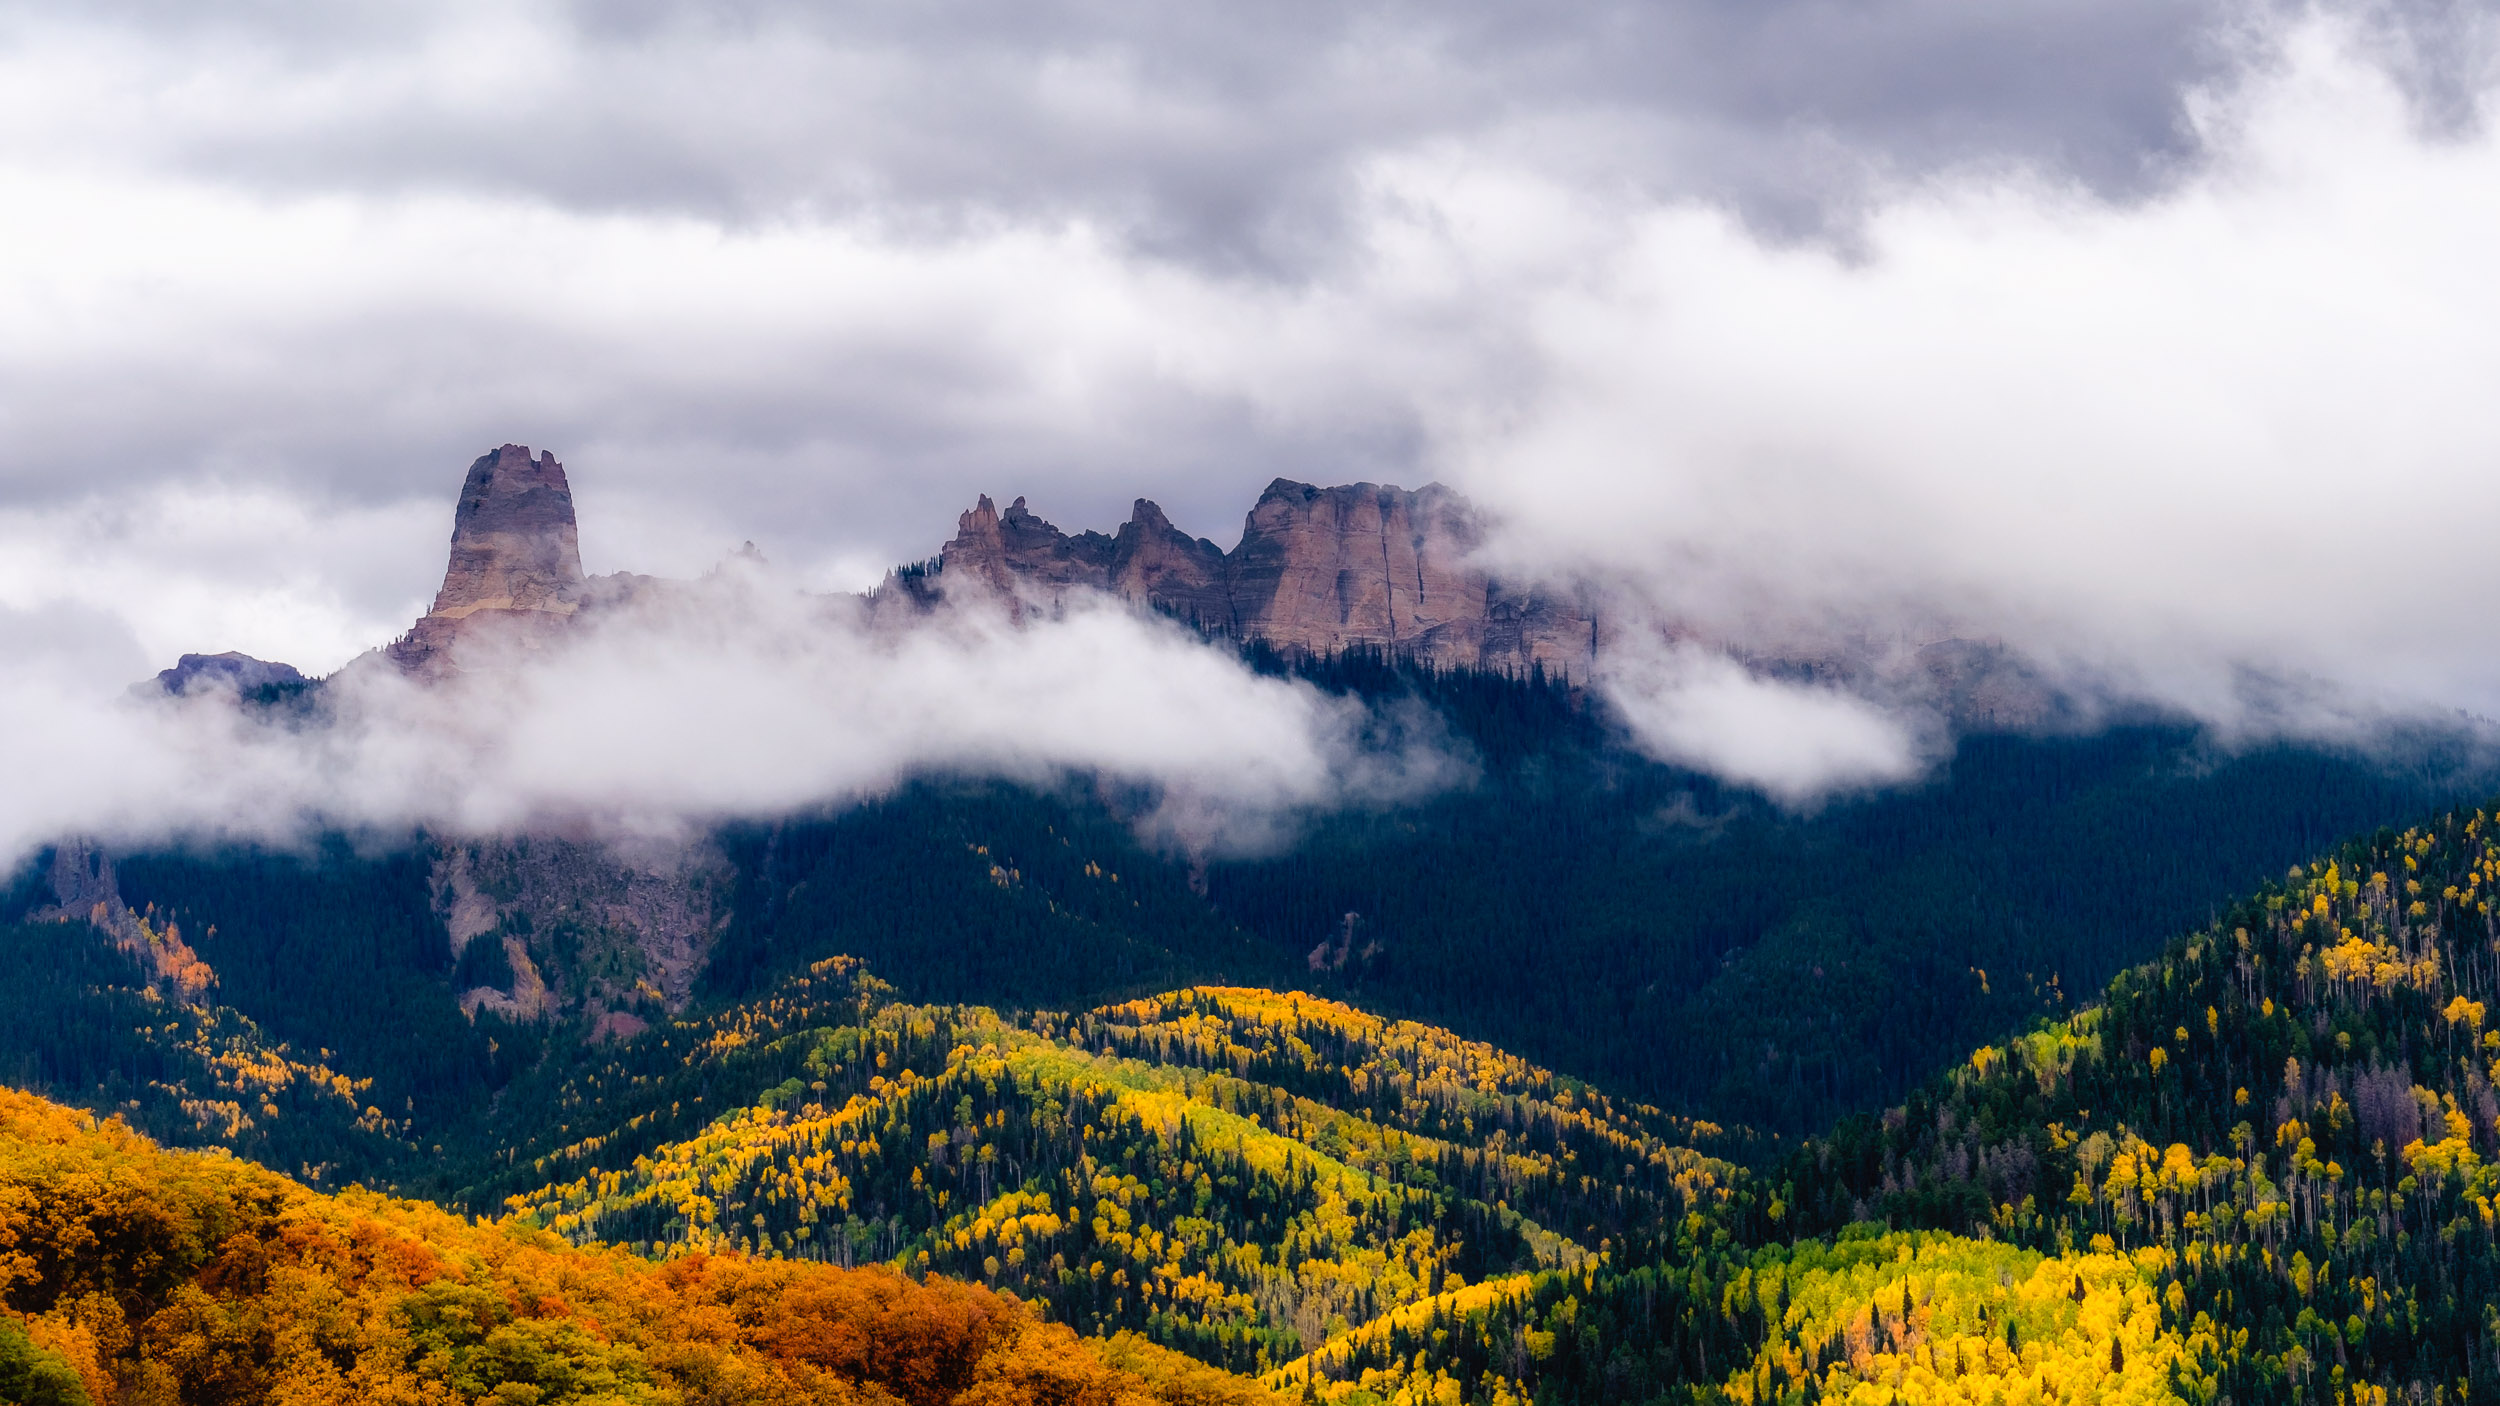  Storm clouds surround Chimney Rock and Courthouse Mountain along Owl Creek Pass in the Uncompahgre National Forest - Fuji XT2, XF 50-140mm f/2.8 @ 71.5mm 